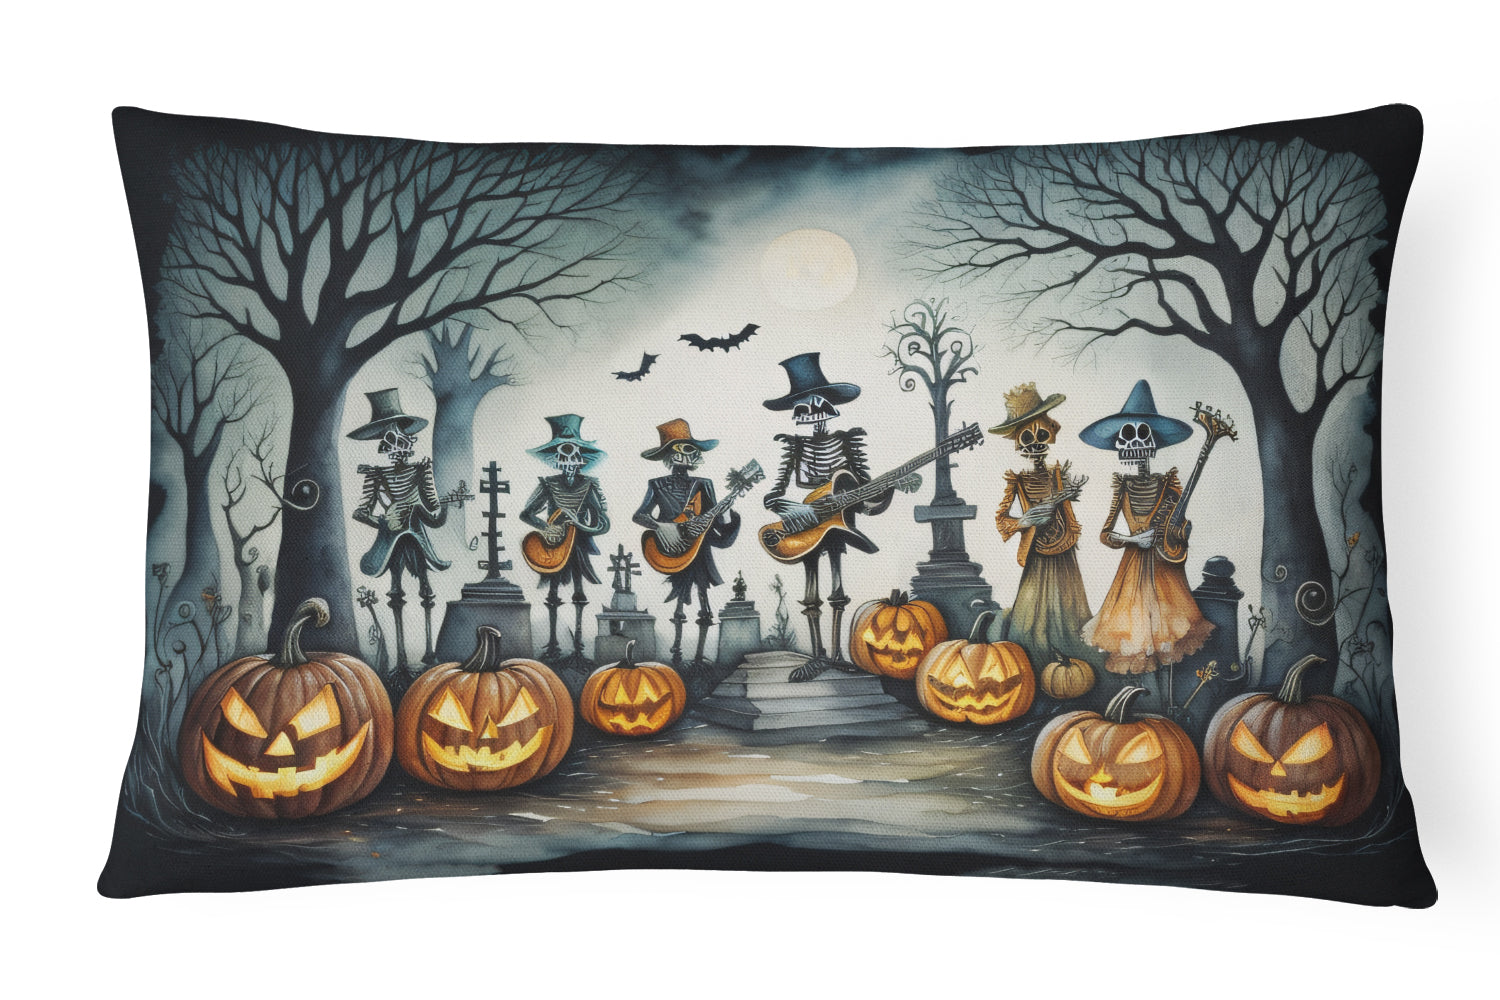 Buy this Mariachi Skeleton Band Spooky Halloween Fabric Decorative Pillow